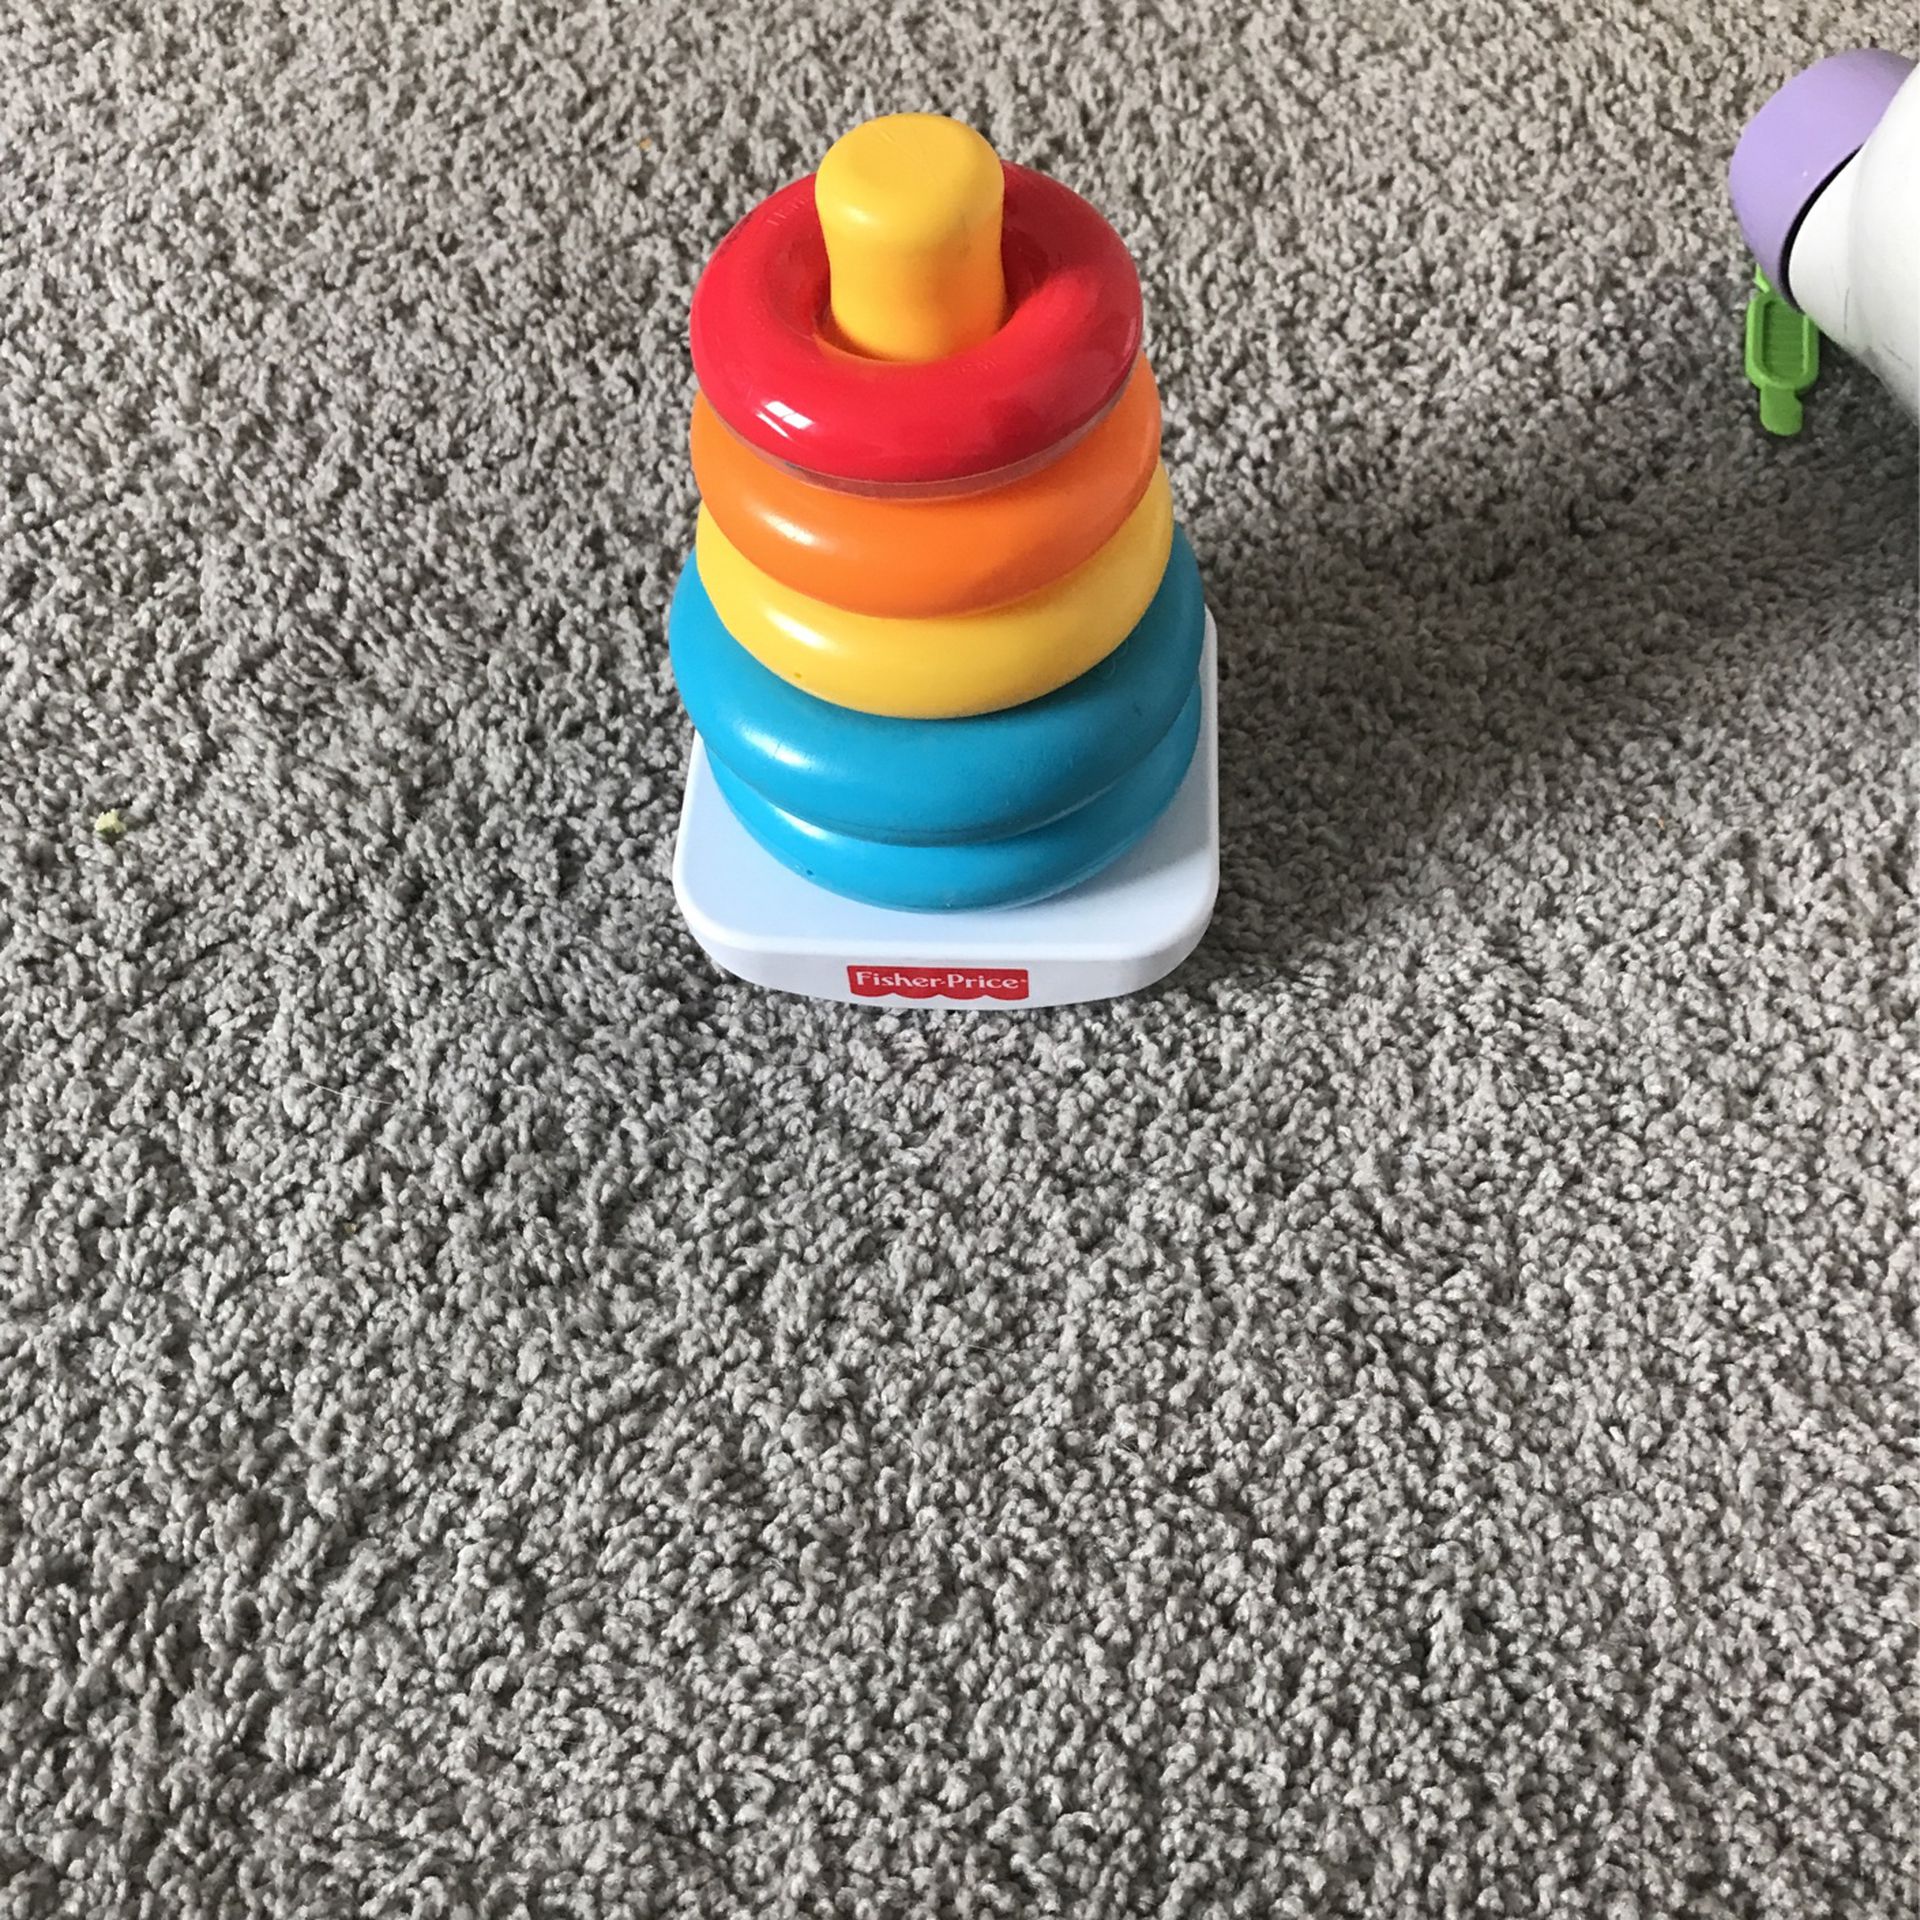 Fisher Price Baby Stacking Toy